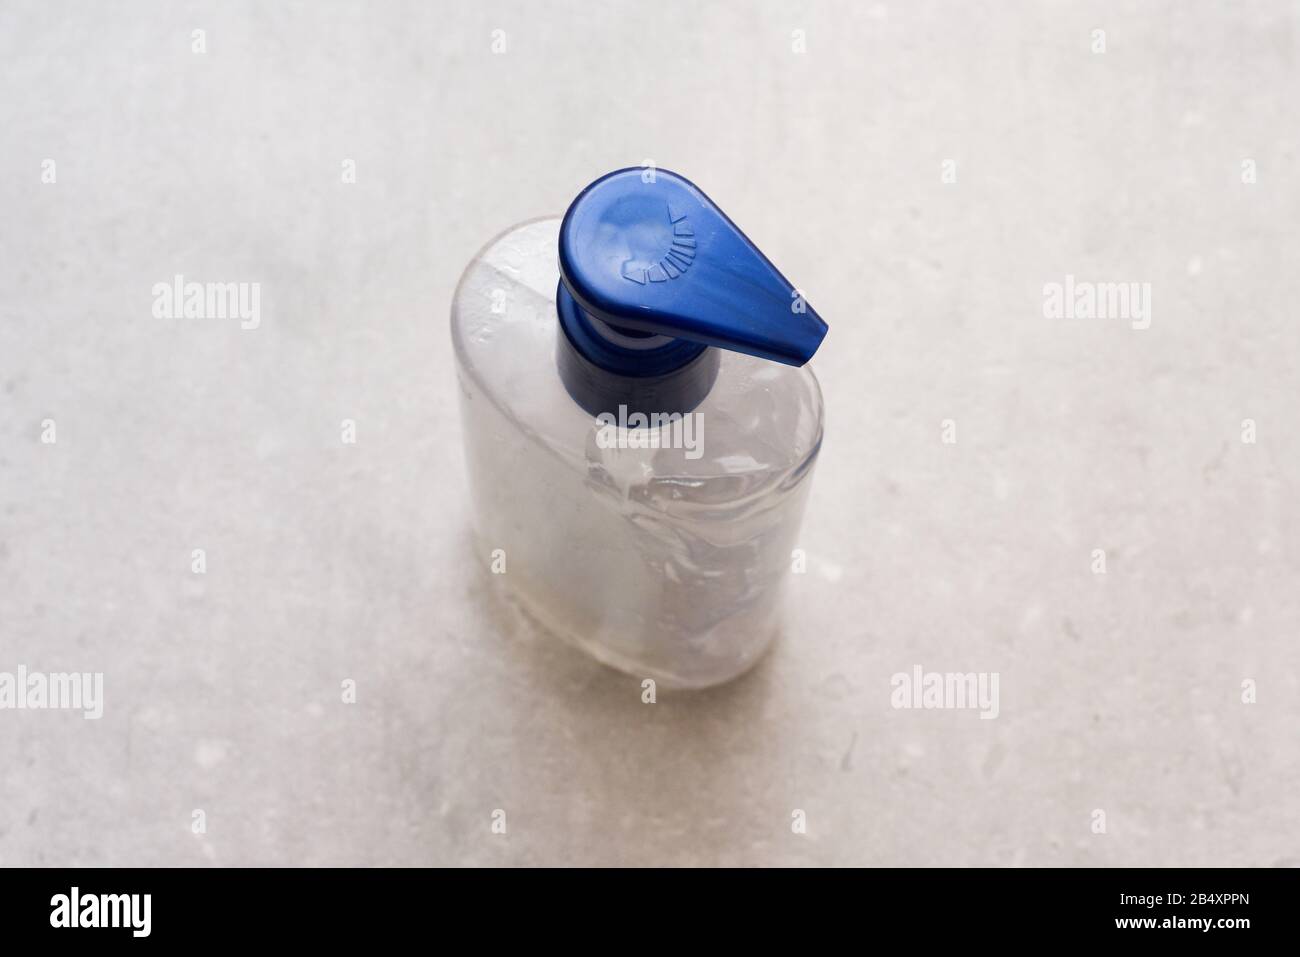 Empty bottle of hand sanitiser gel which has run out Stock Photo